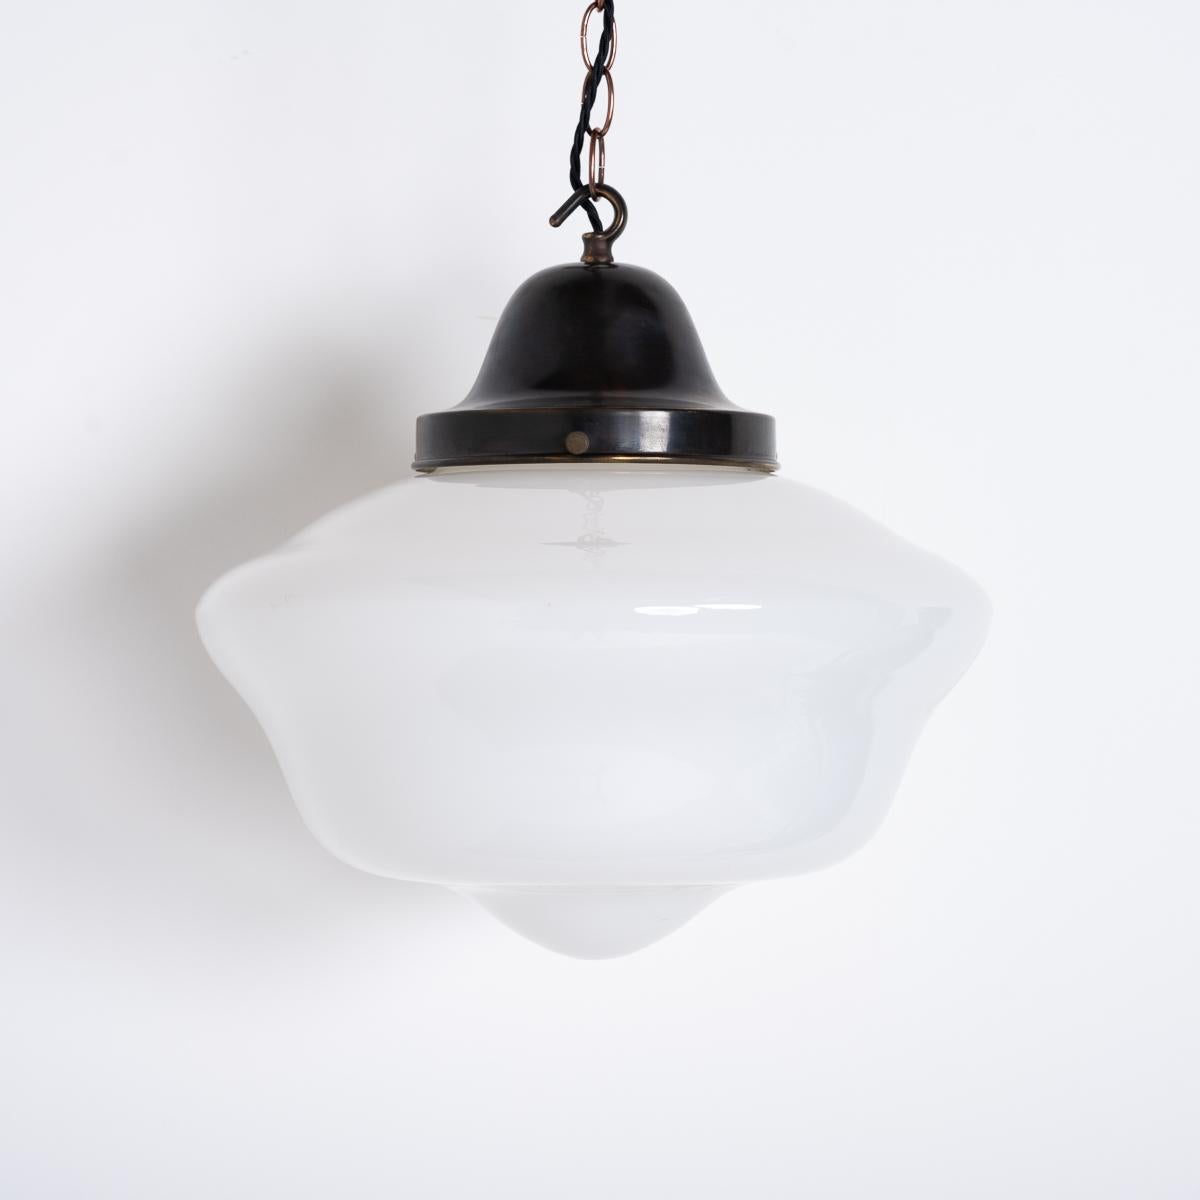 A STUNNING TRIO OF LARGE SCHOOLHOUSE OPALINE PENDANTS
SOLD AS A SET OF THREE

Reclaimed from a social club in the North East of England.

Beautiful shaped opaline glass with original aged brass galleries completely original and finished with beeswax